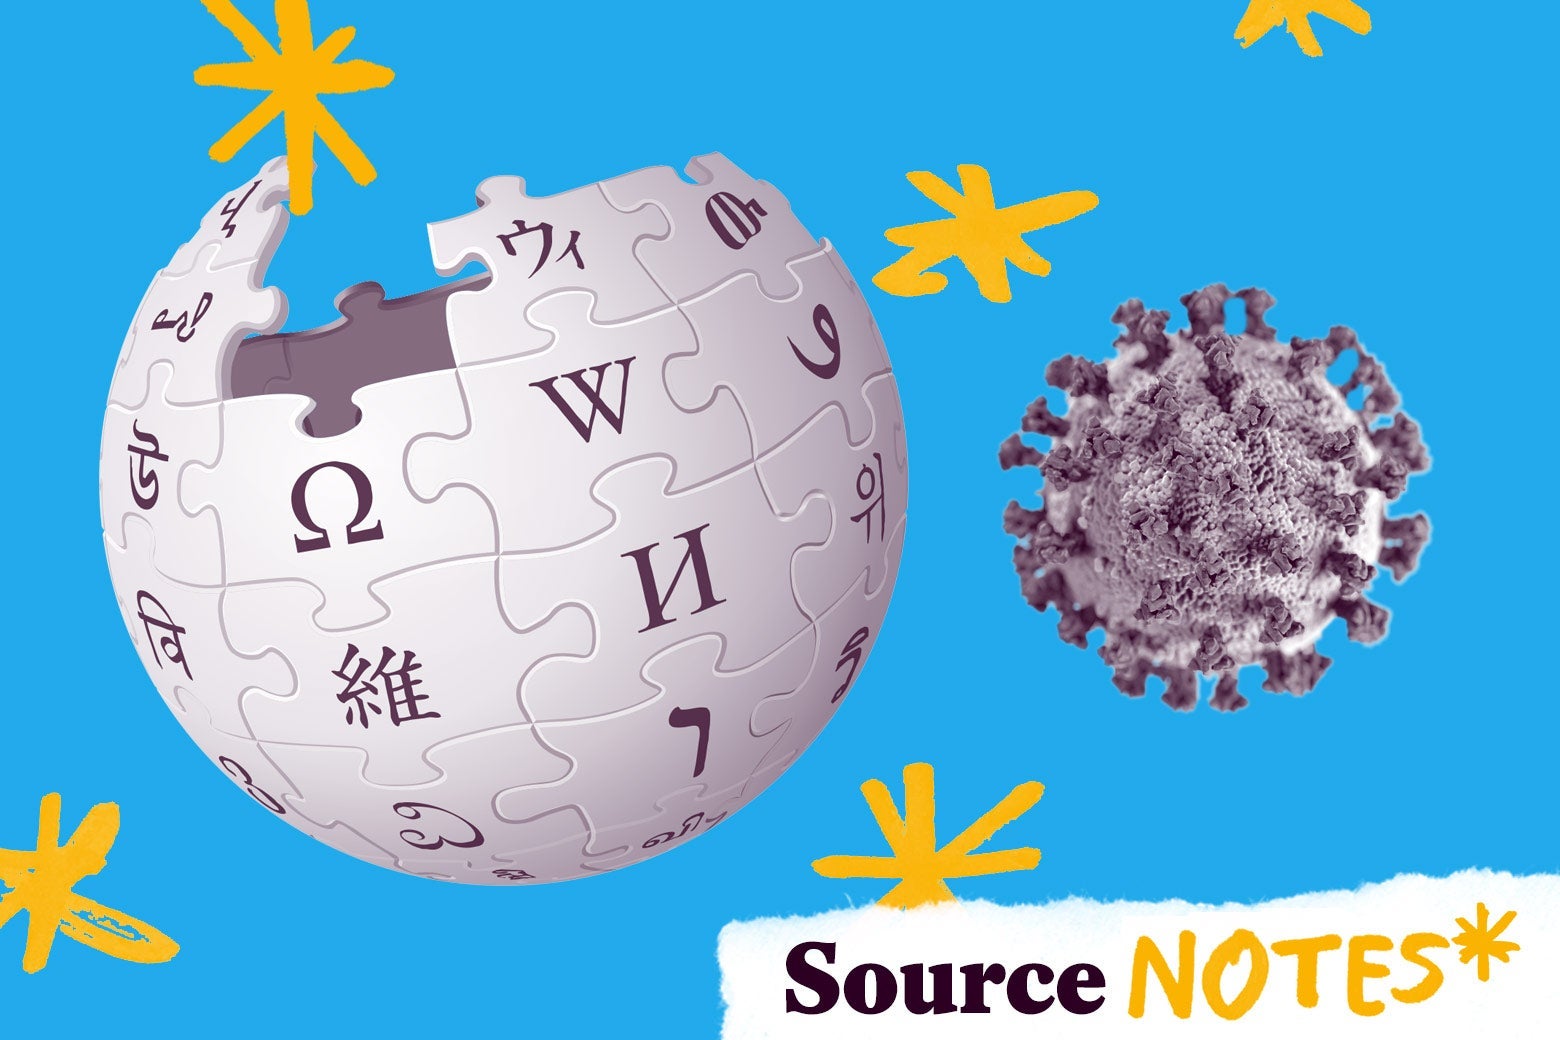 The Wikipedia globe is seen next to a coronavirus cell. Both are surrounded by asterisks.